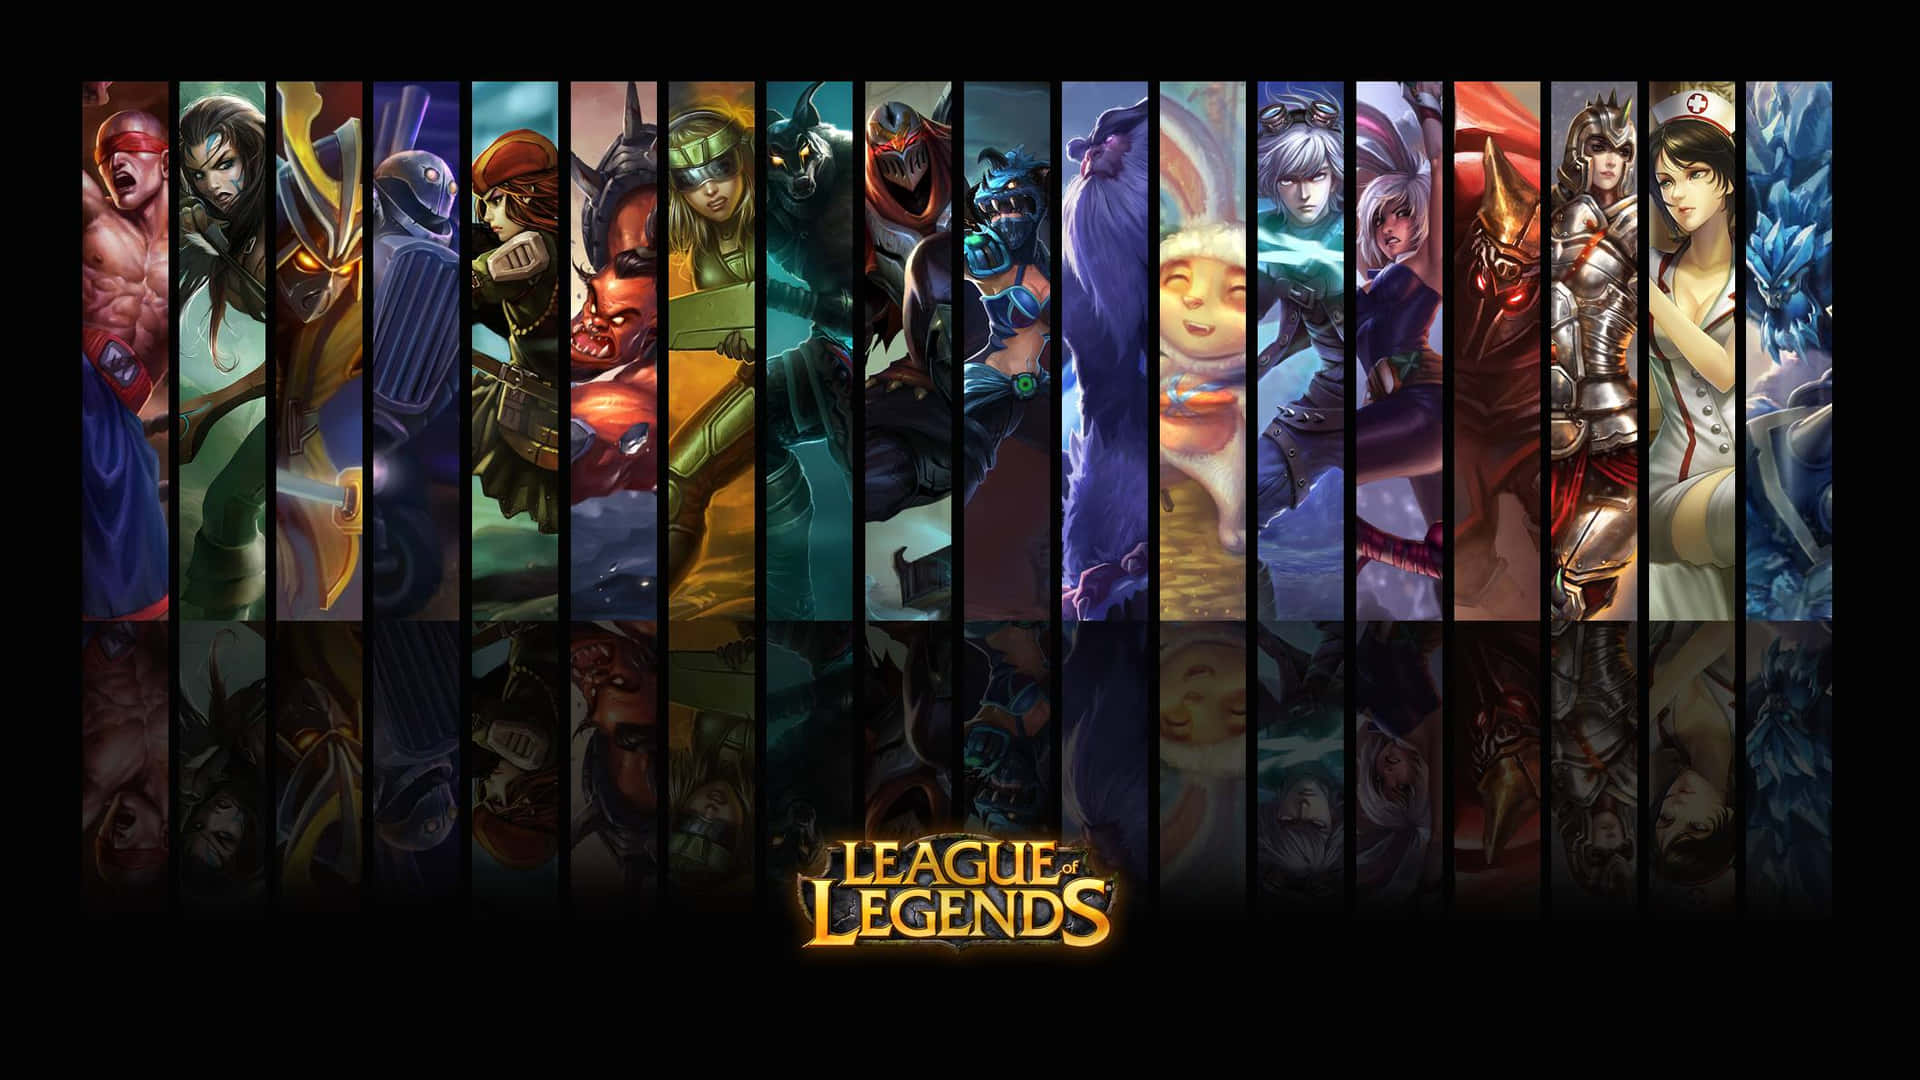 Step up your PvP game with a league of legends laptop Wallpaper